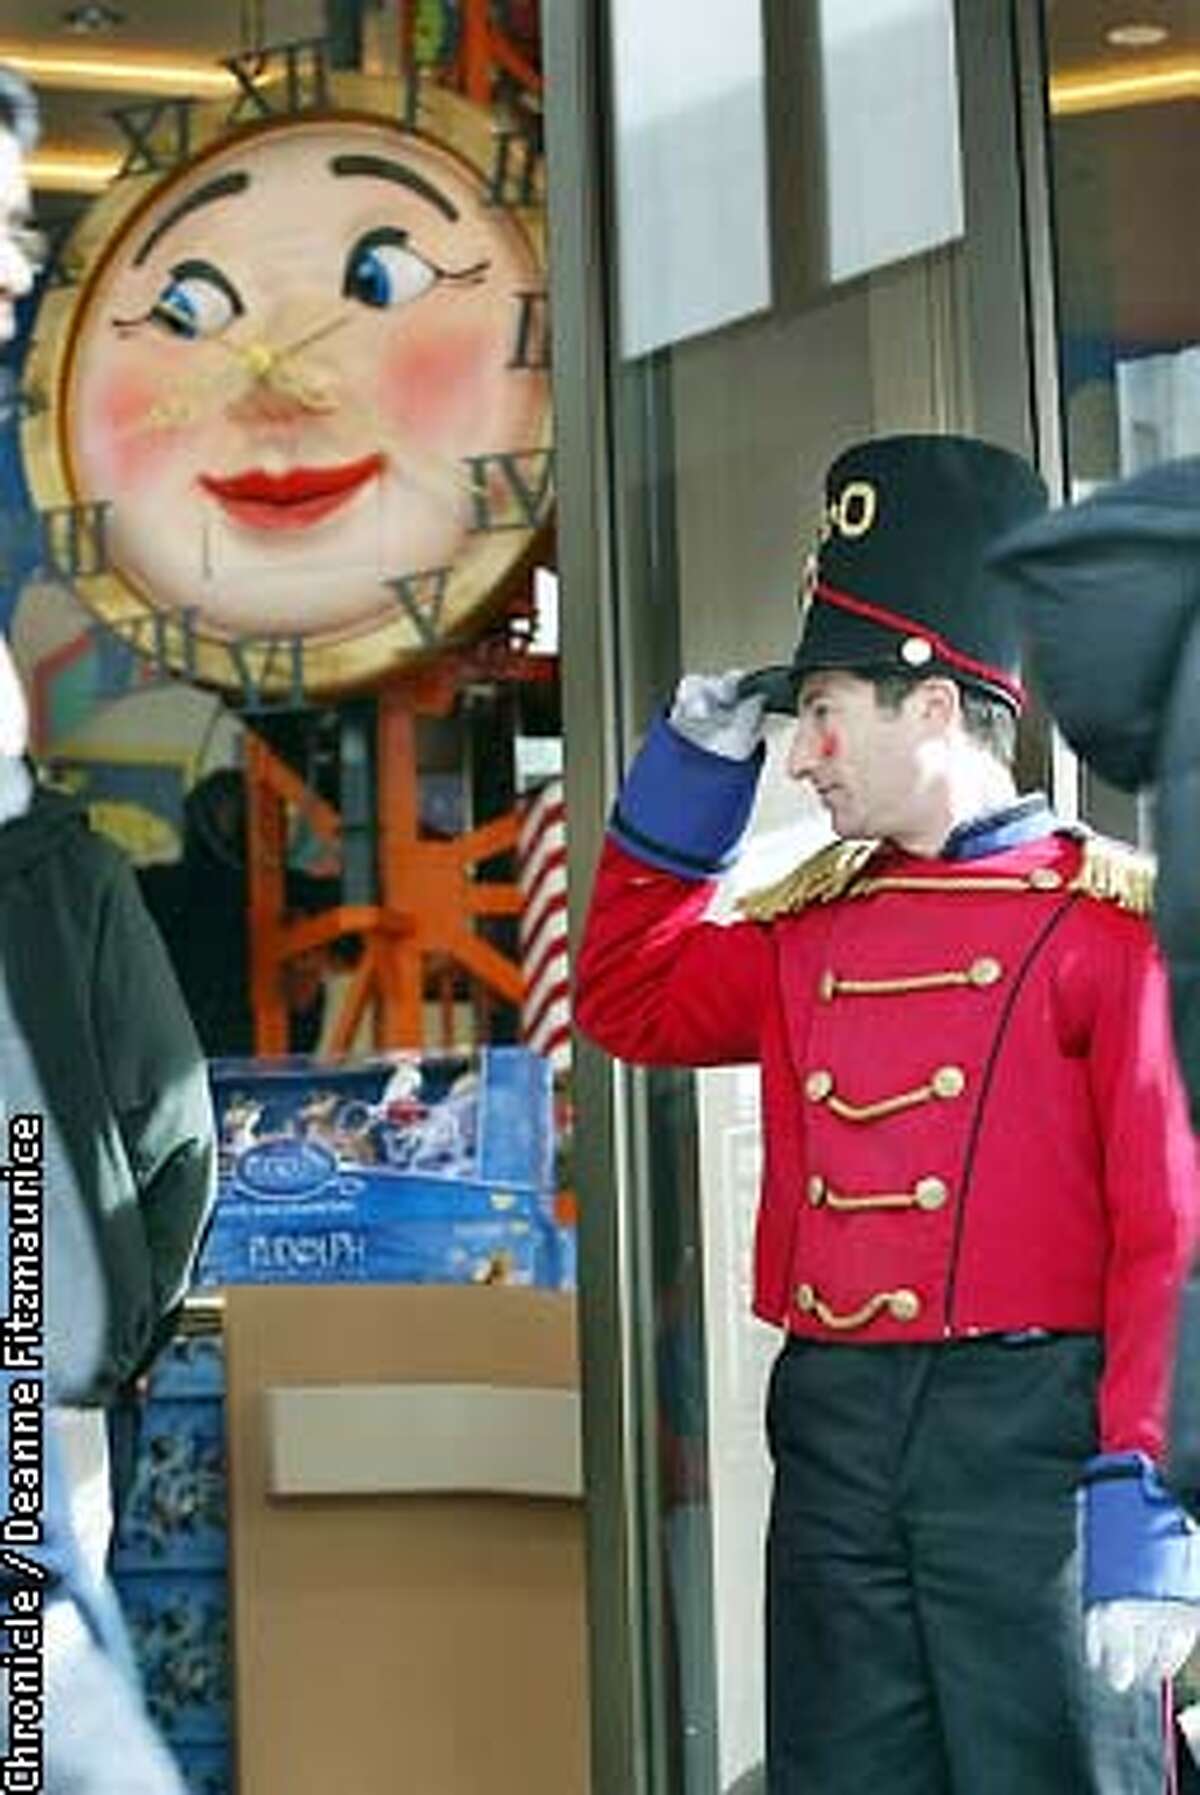 FAO Schwarz toy store at Union Square may be closing. Adam Kamil, dressed as a toy soldier greets shoppers at the entrance to the store. CHRONICLE PHOTO BY DEANNE FITZMAURICE